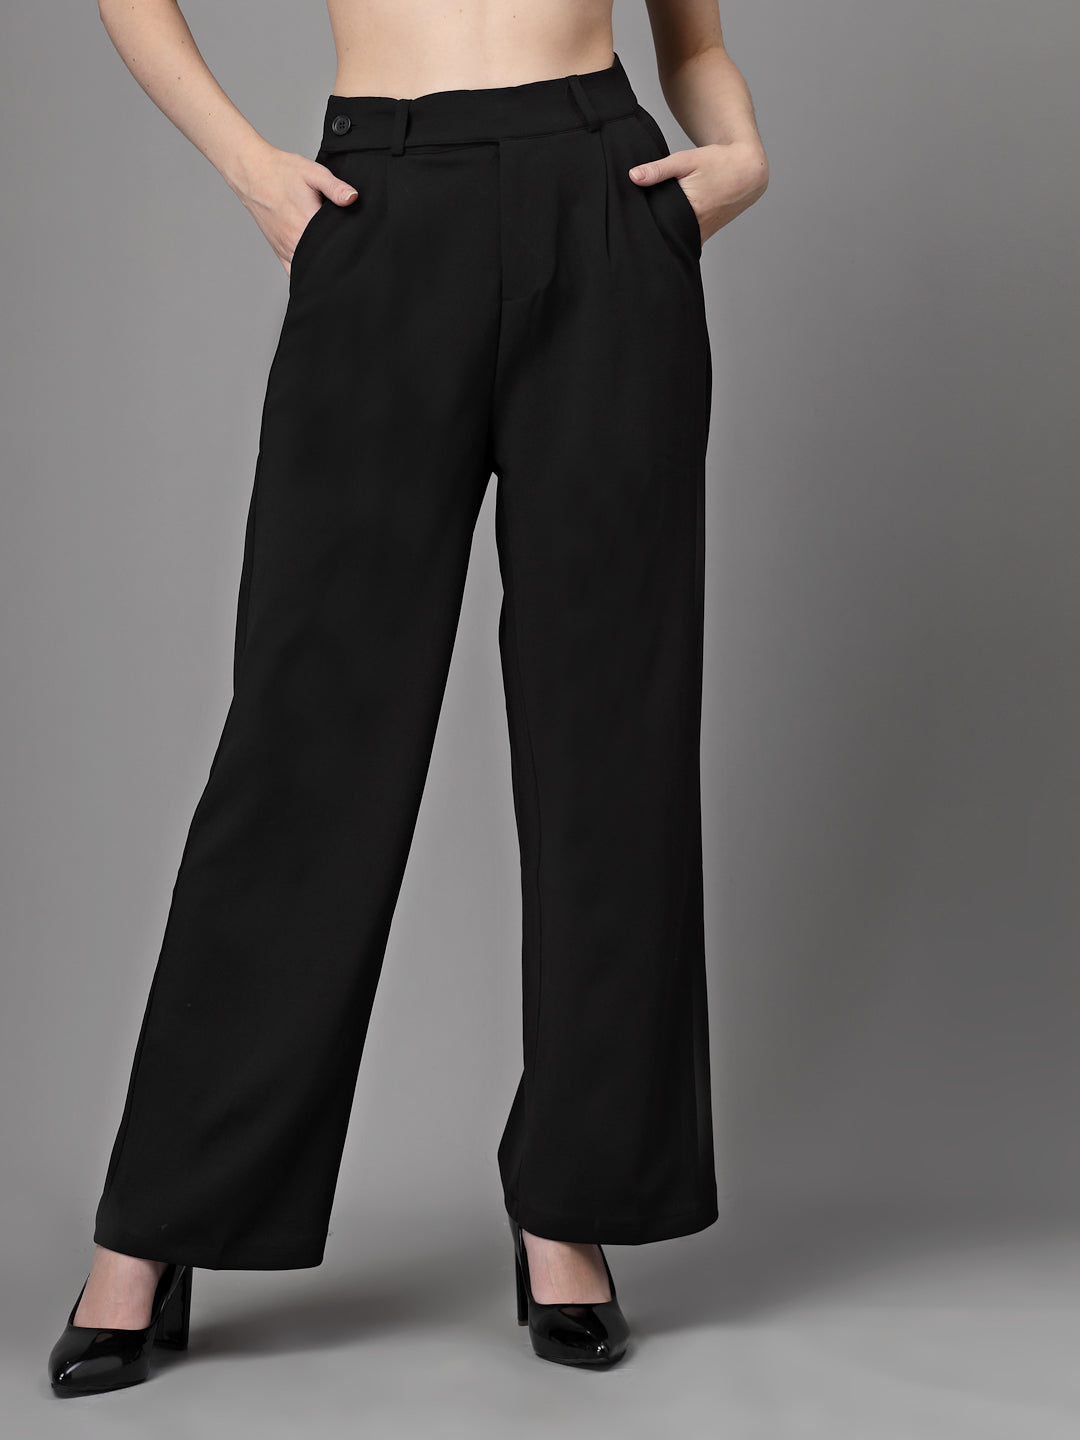 Twister Trousers with Slim Leg | Eurostyle +